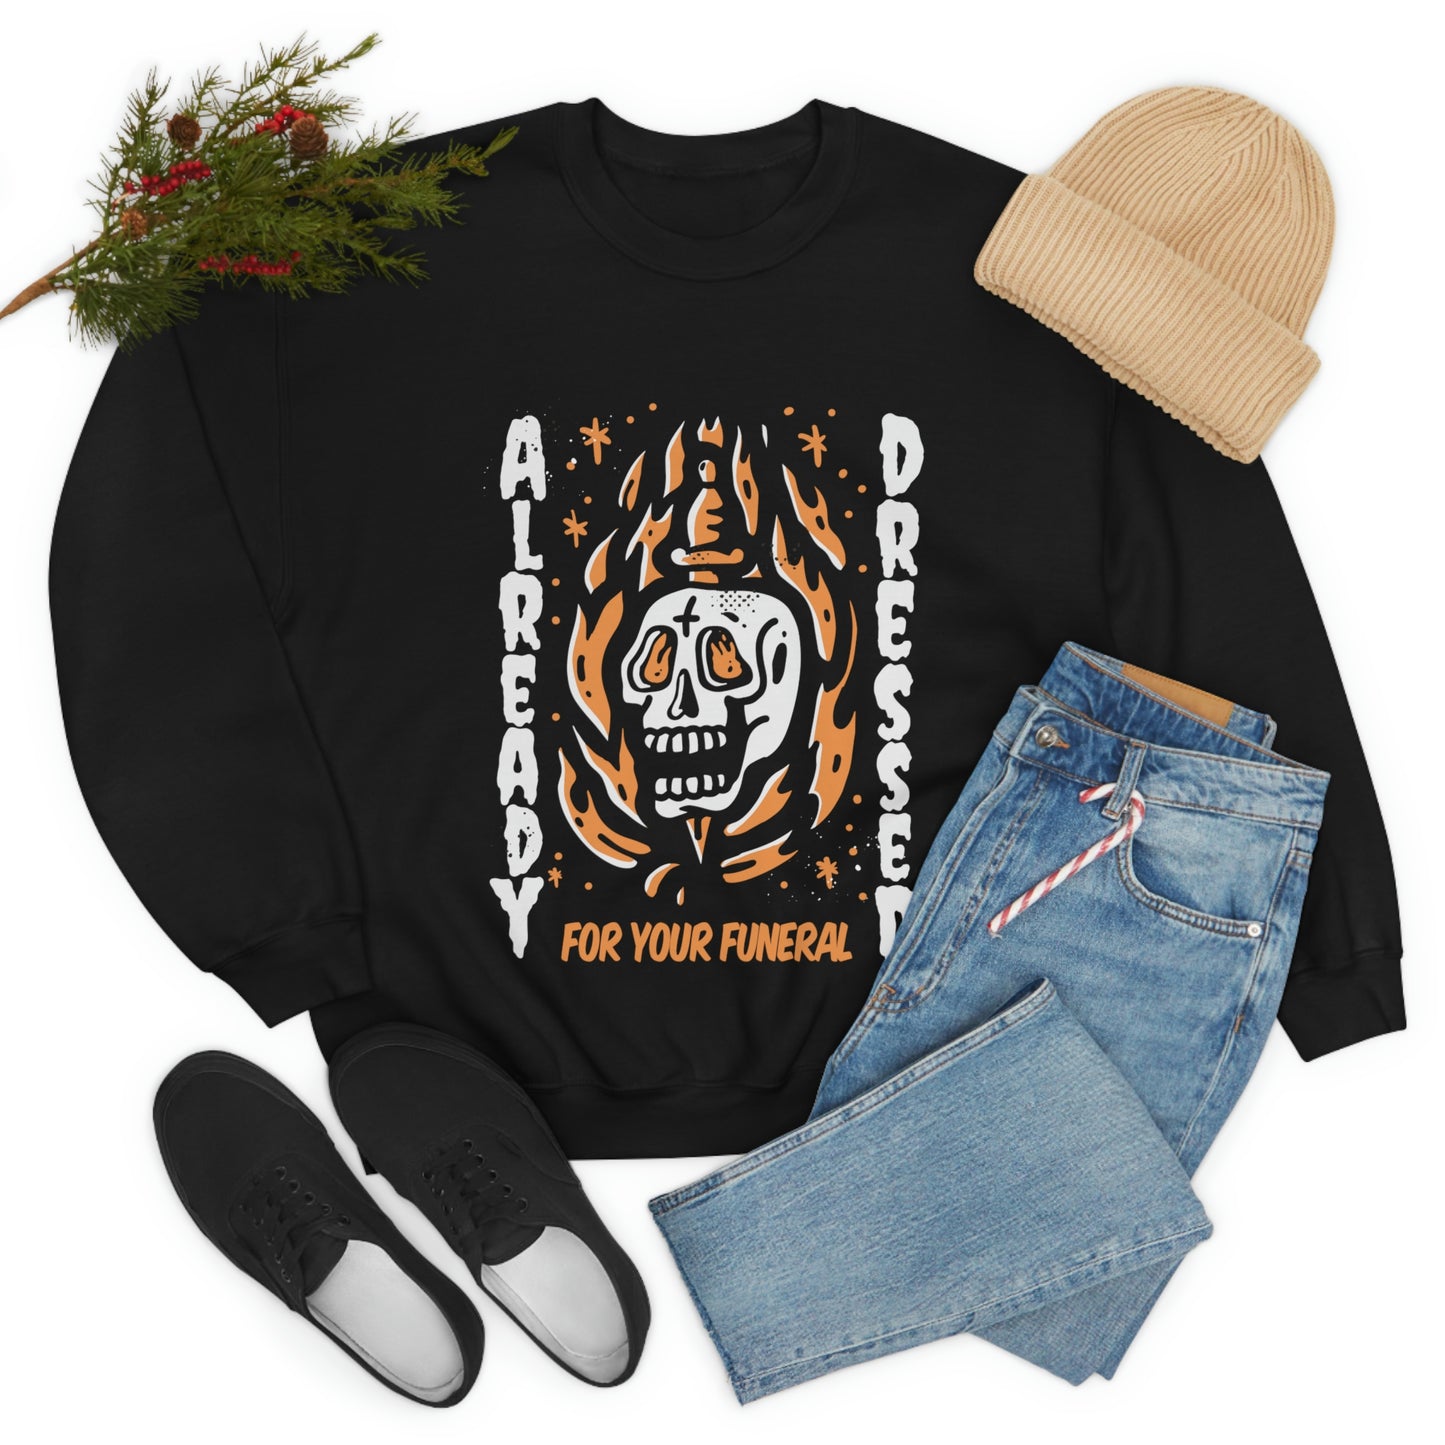 Already Dressed For Your Funeral Goth Aesthetic Sweatshirt